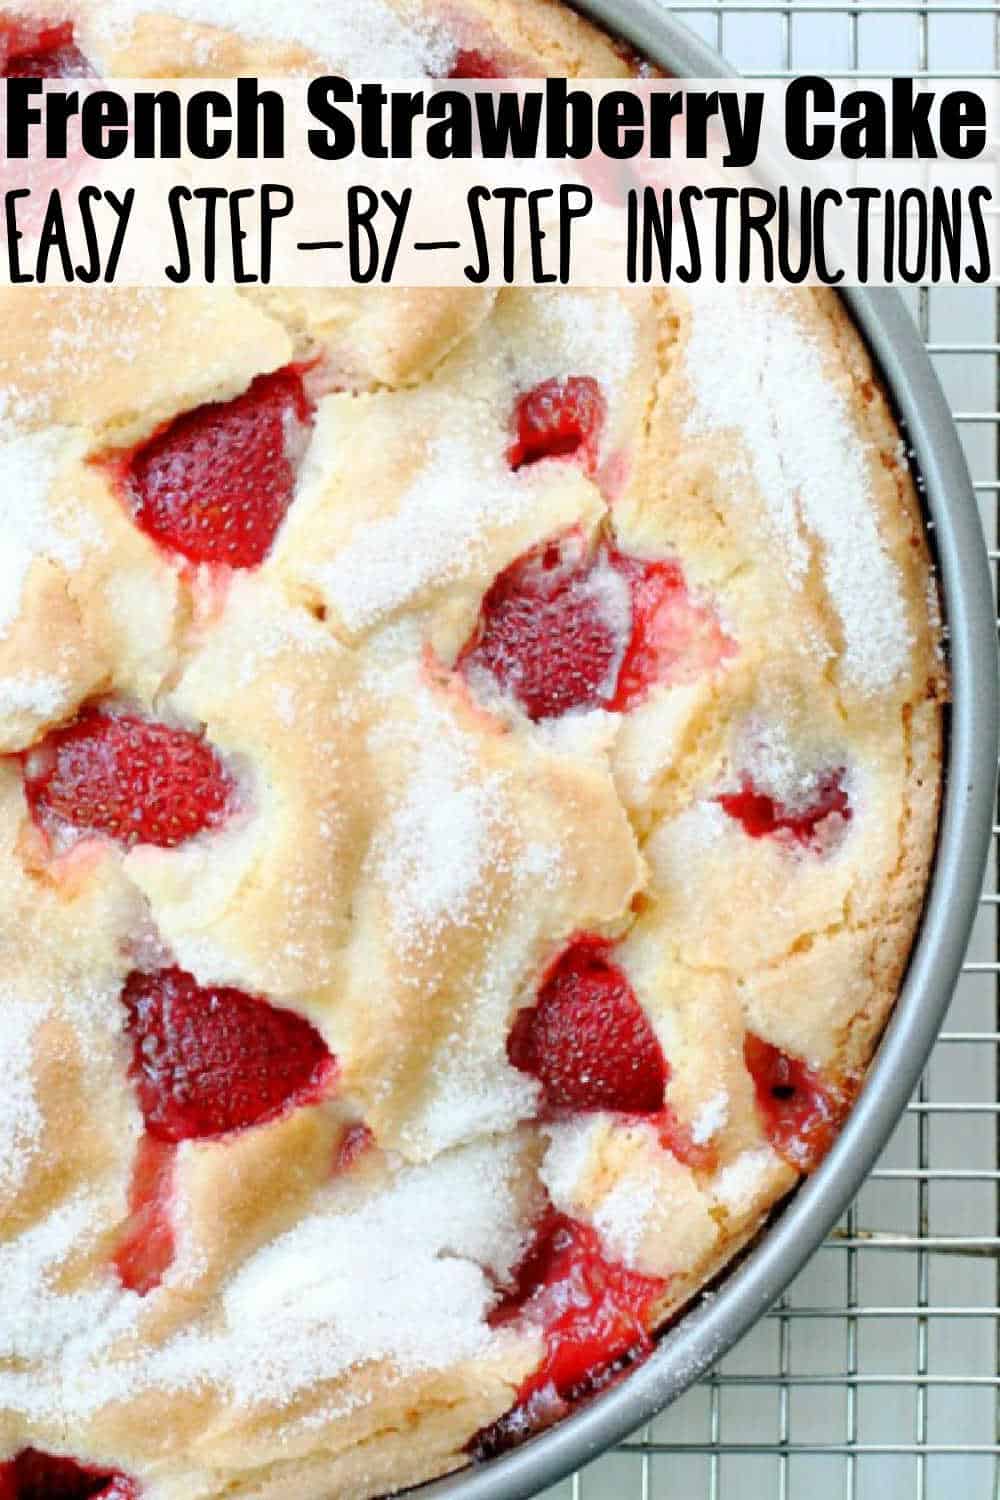 French Strawberry Cake | Foodtastic Mom #frenchstrawberrycake #cakerecipes #strawberryrecipes #dessertrecipes #strawberrycake via @foodtasticmom